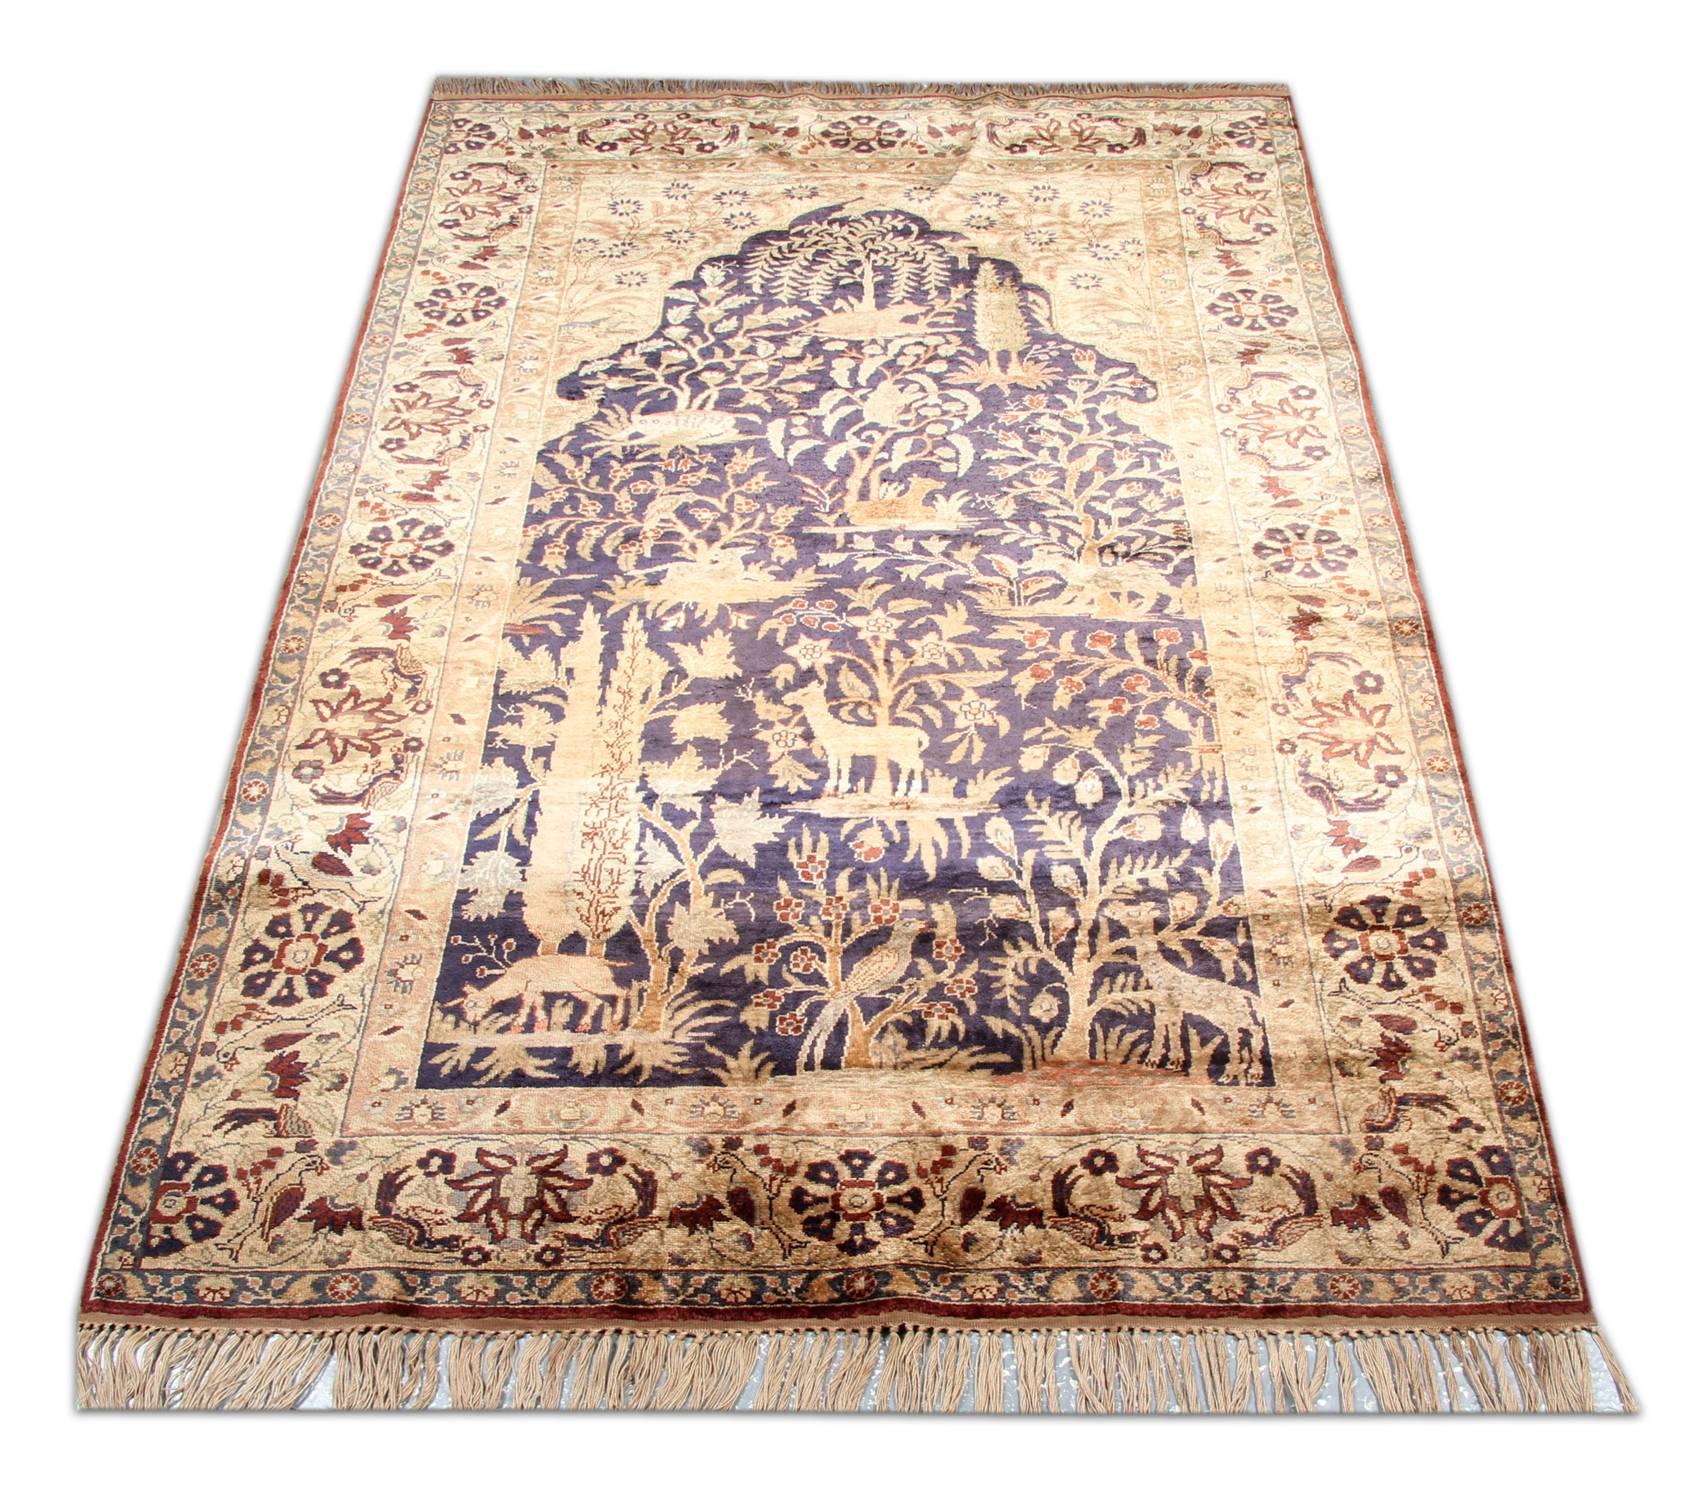 A finely hand knotted vintage Central Anatolian golden purple rug with a Classic all-over paradise design of small patterns. The high-quality wool pile on strong silk foundation of this gold rug and excellent original condition let this floral rug